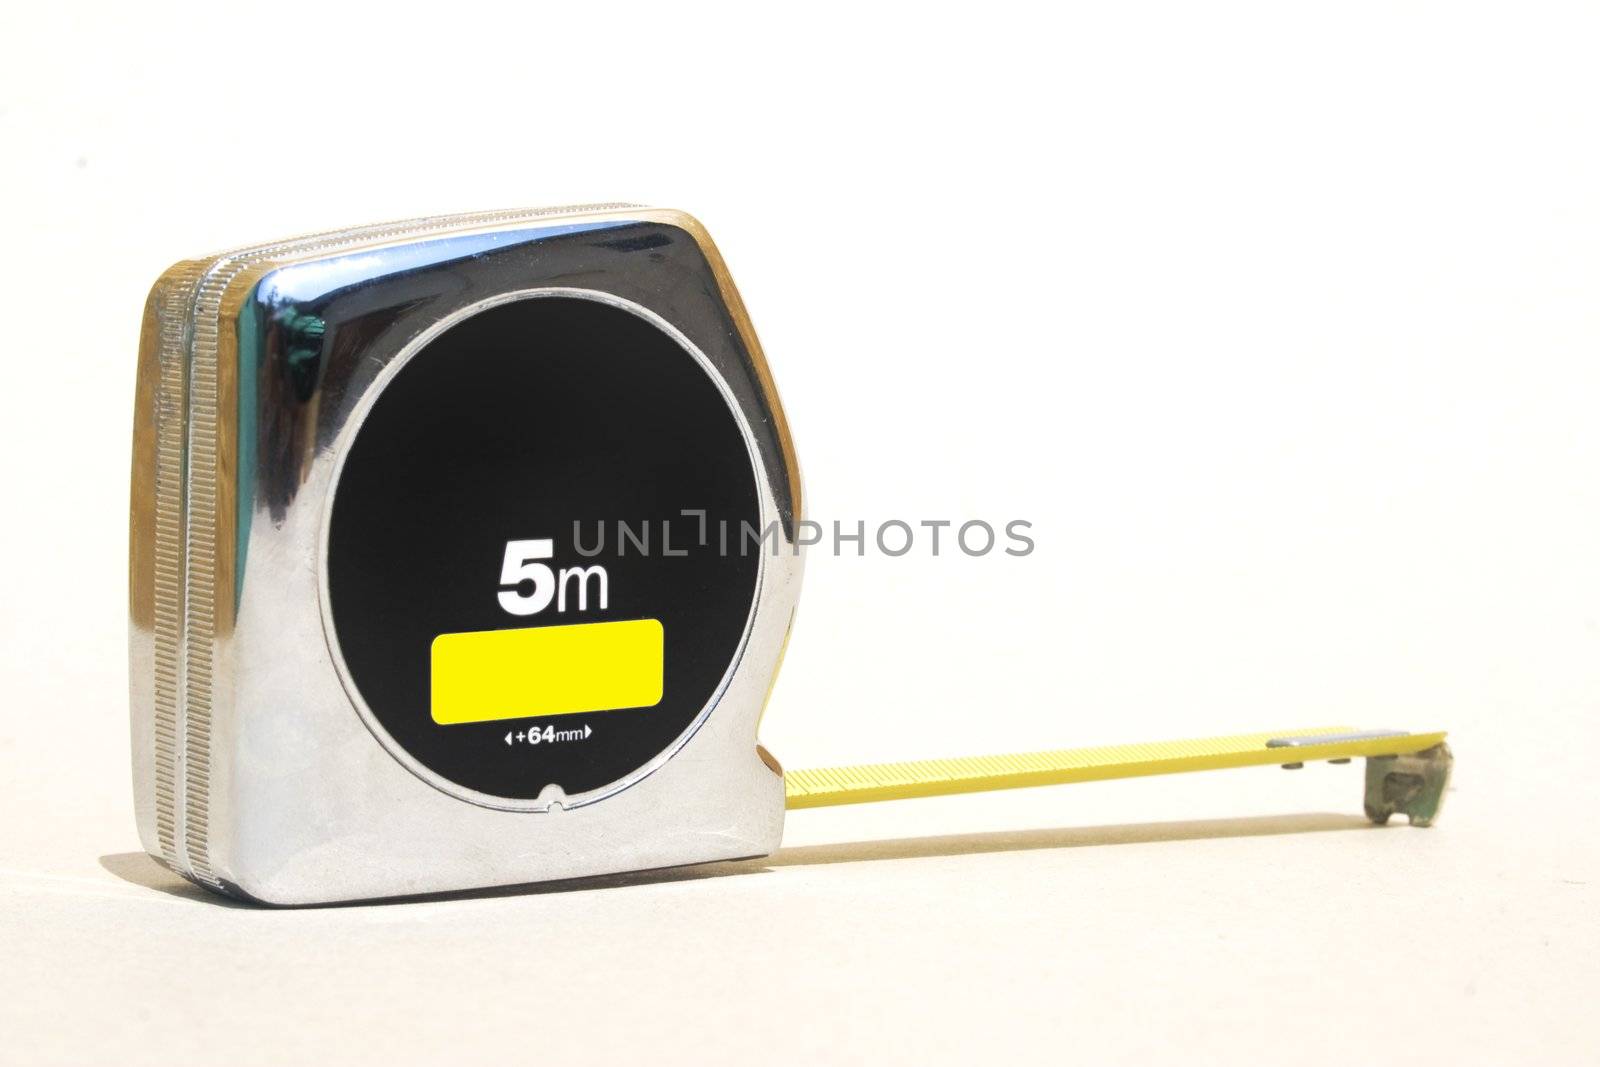 Silver retractable tape ruler against white background